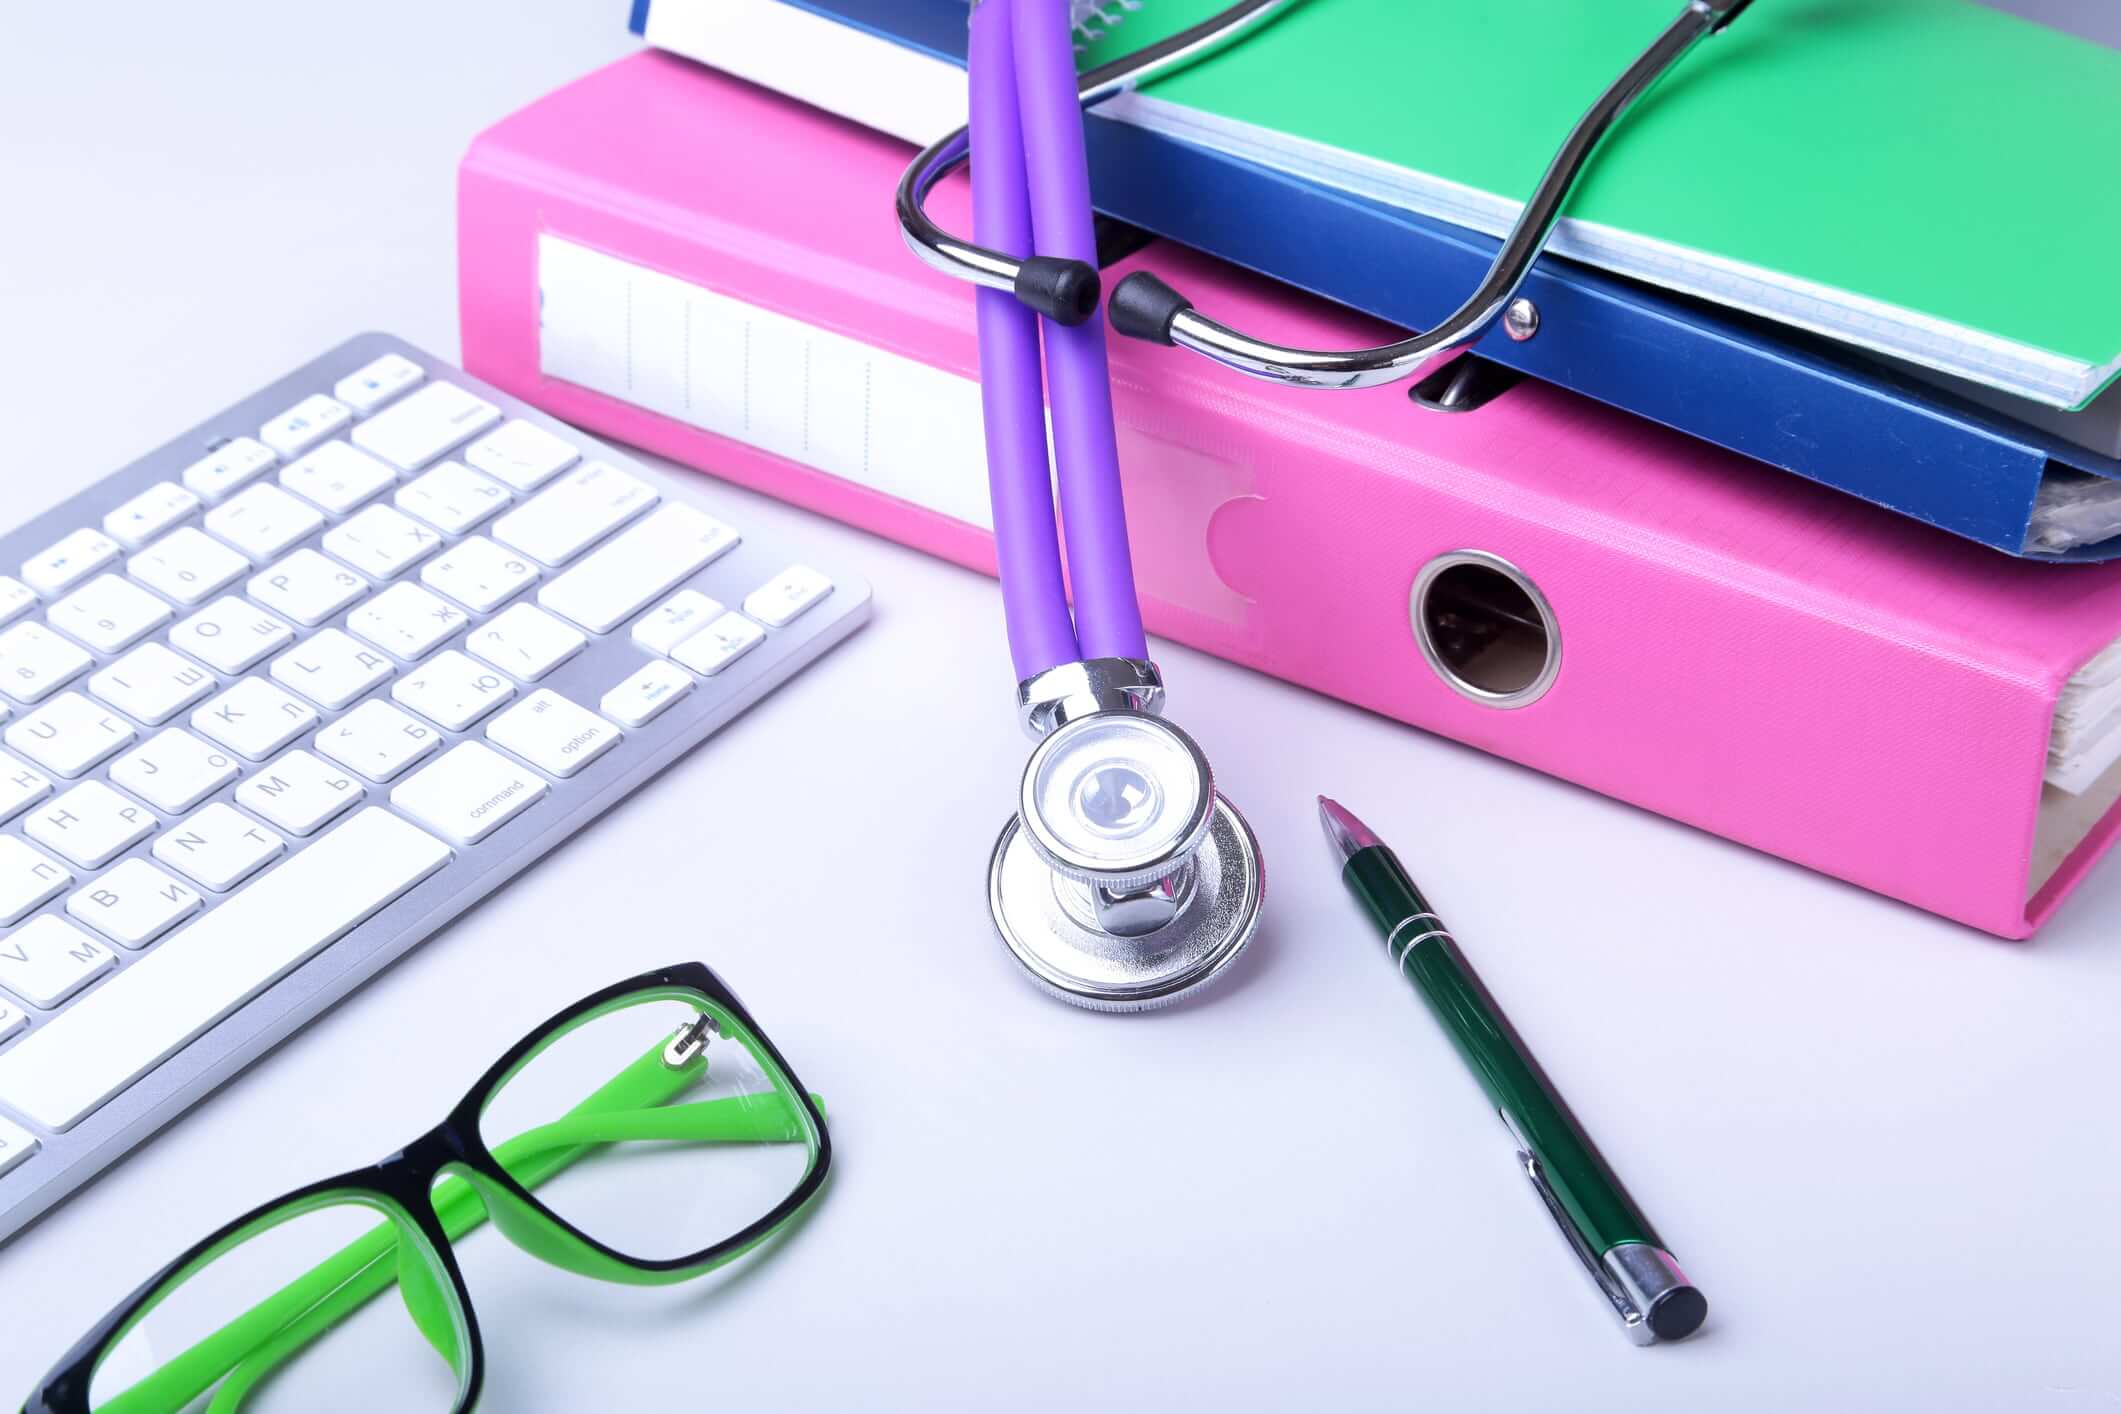 How to choose the right EHR for a small practice